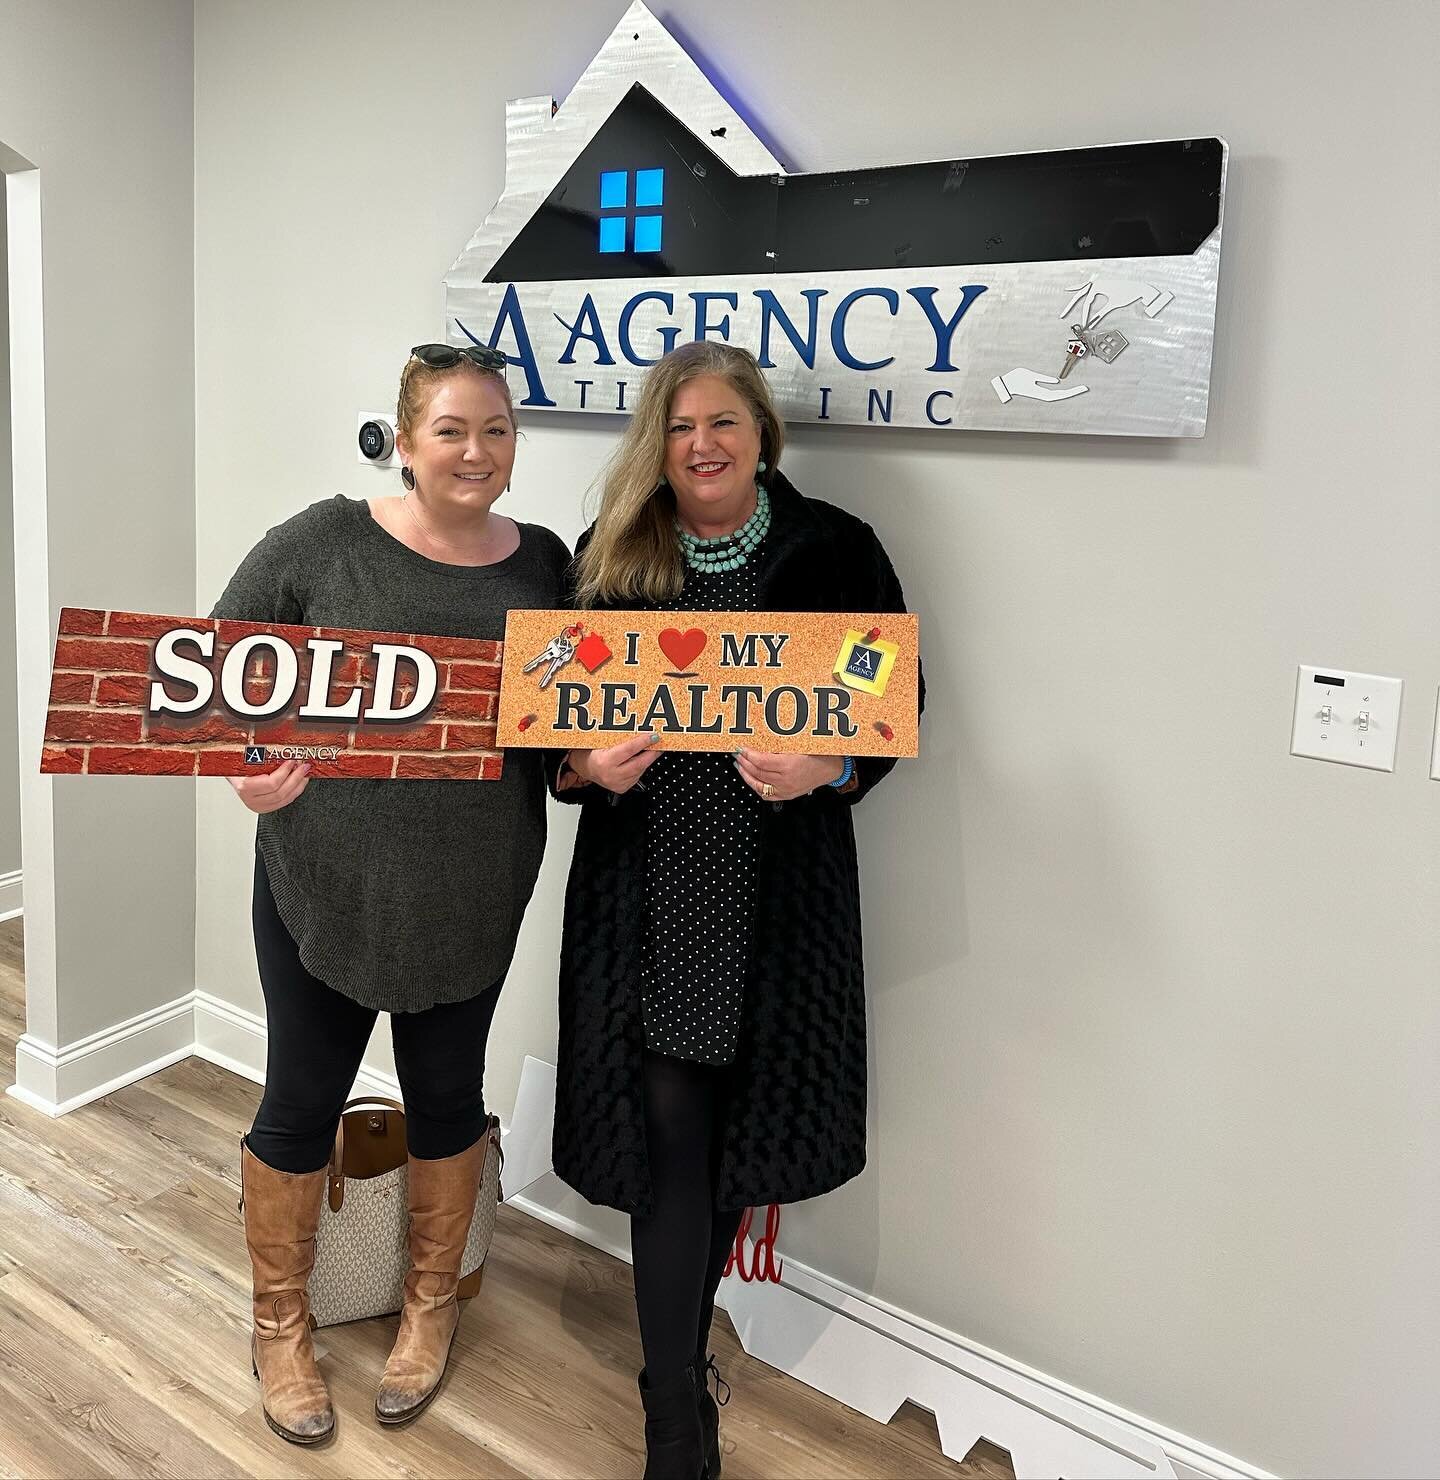 💕 Working with family and friends just makes them that much sweeter 💕
🍾 CONGRATULATIONS to my client and very special friend Joanna on the purchase of her beautiful new patio home!! I&rsquo;m so happy for you and honored that you chose me to help 